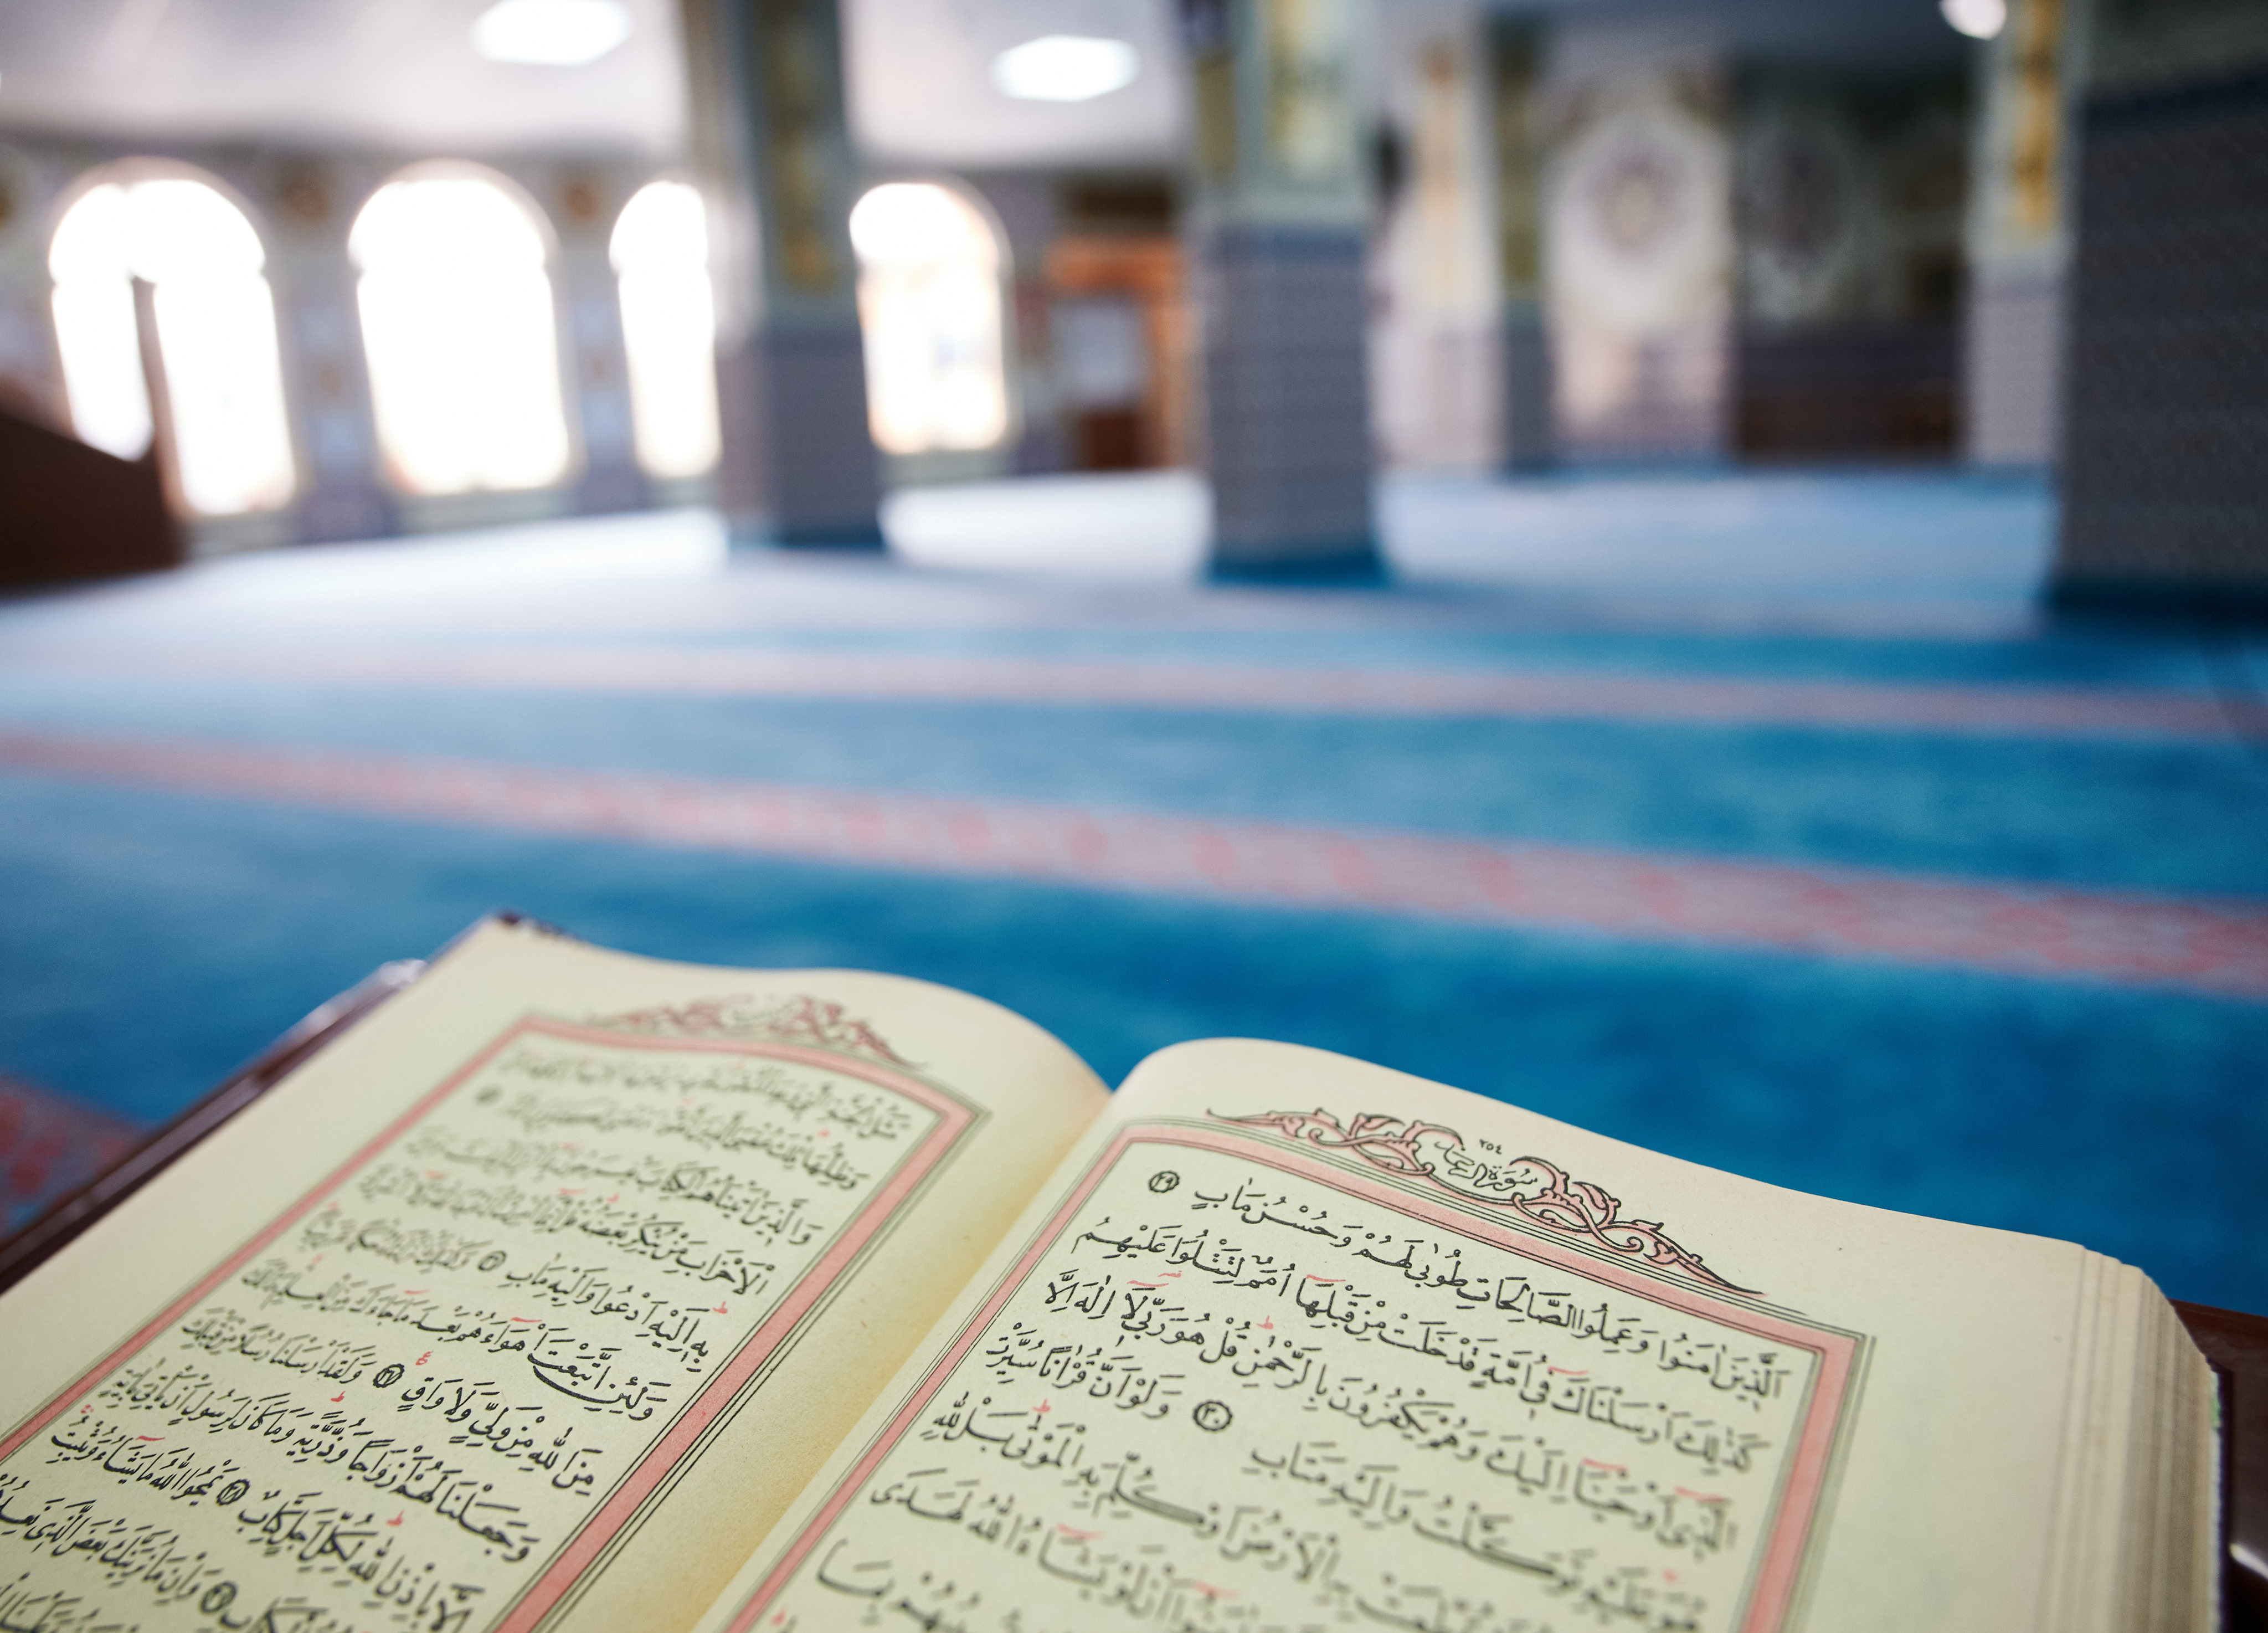 Denmark has adopted a law that bans the burning of the Koran. Photo: dpa